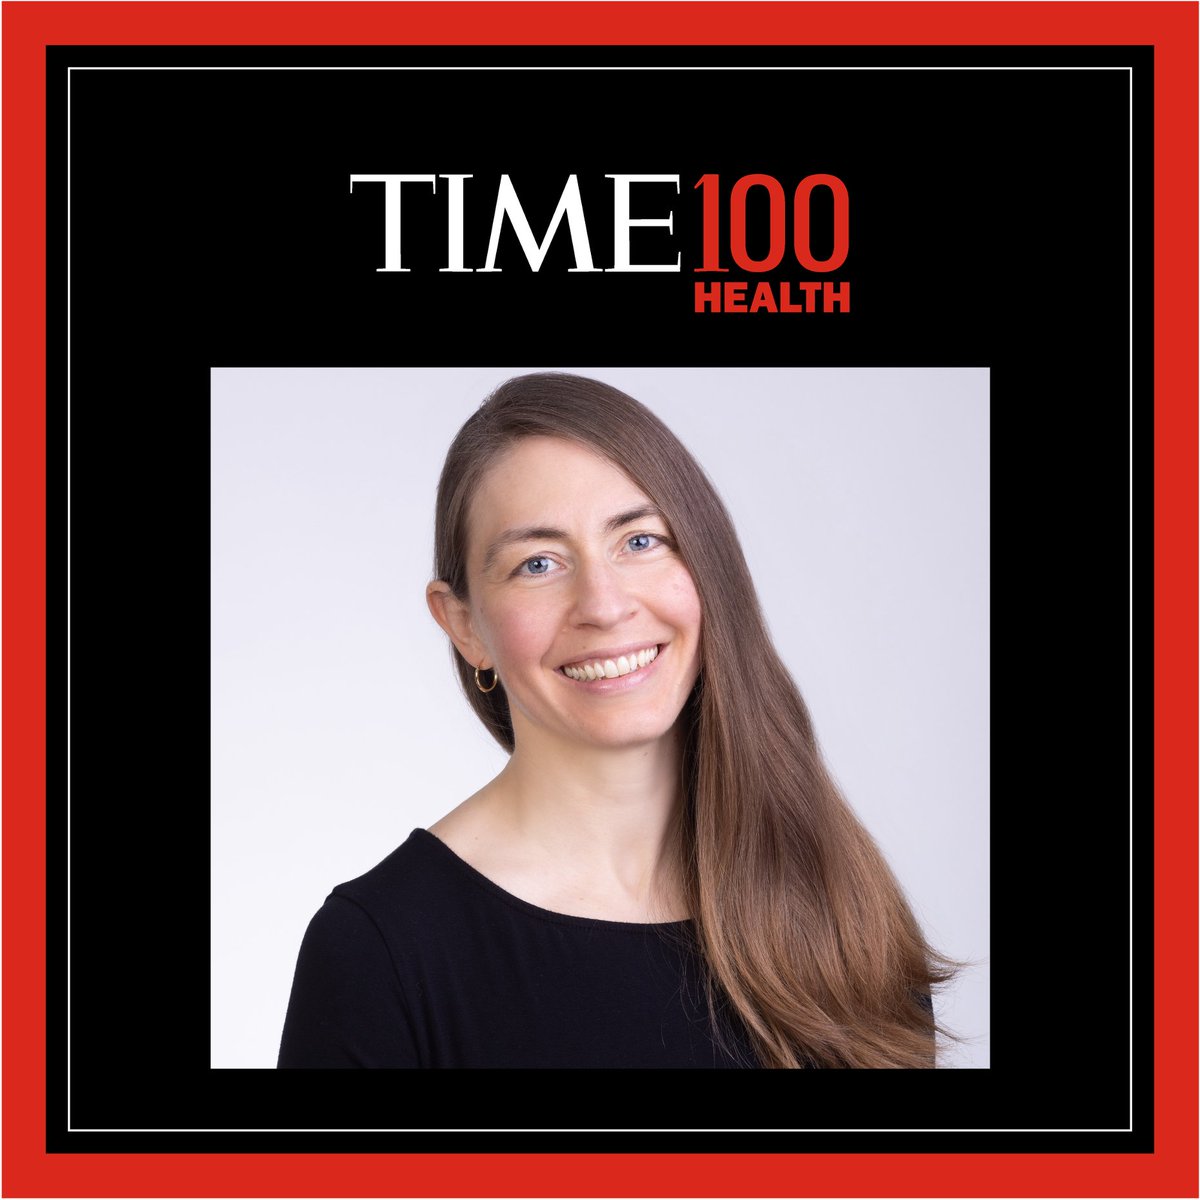 @TIME named Jenna Forsyth, a scientist at @StanfordMed, to its #TIME100 Health list for her research uncovering lead contamination in turmeric. The award: stanford.io/44ubHEQ Jenna’s early work on lead in turmeric: stanford.io/4a697X9 Interview: bit.ly/3QvsnpV